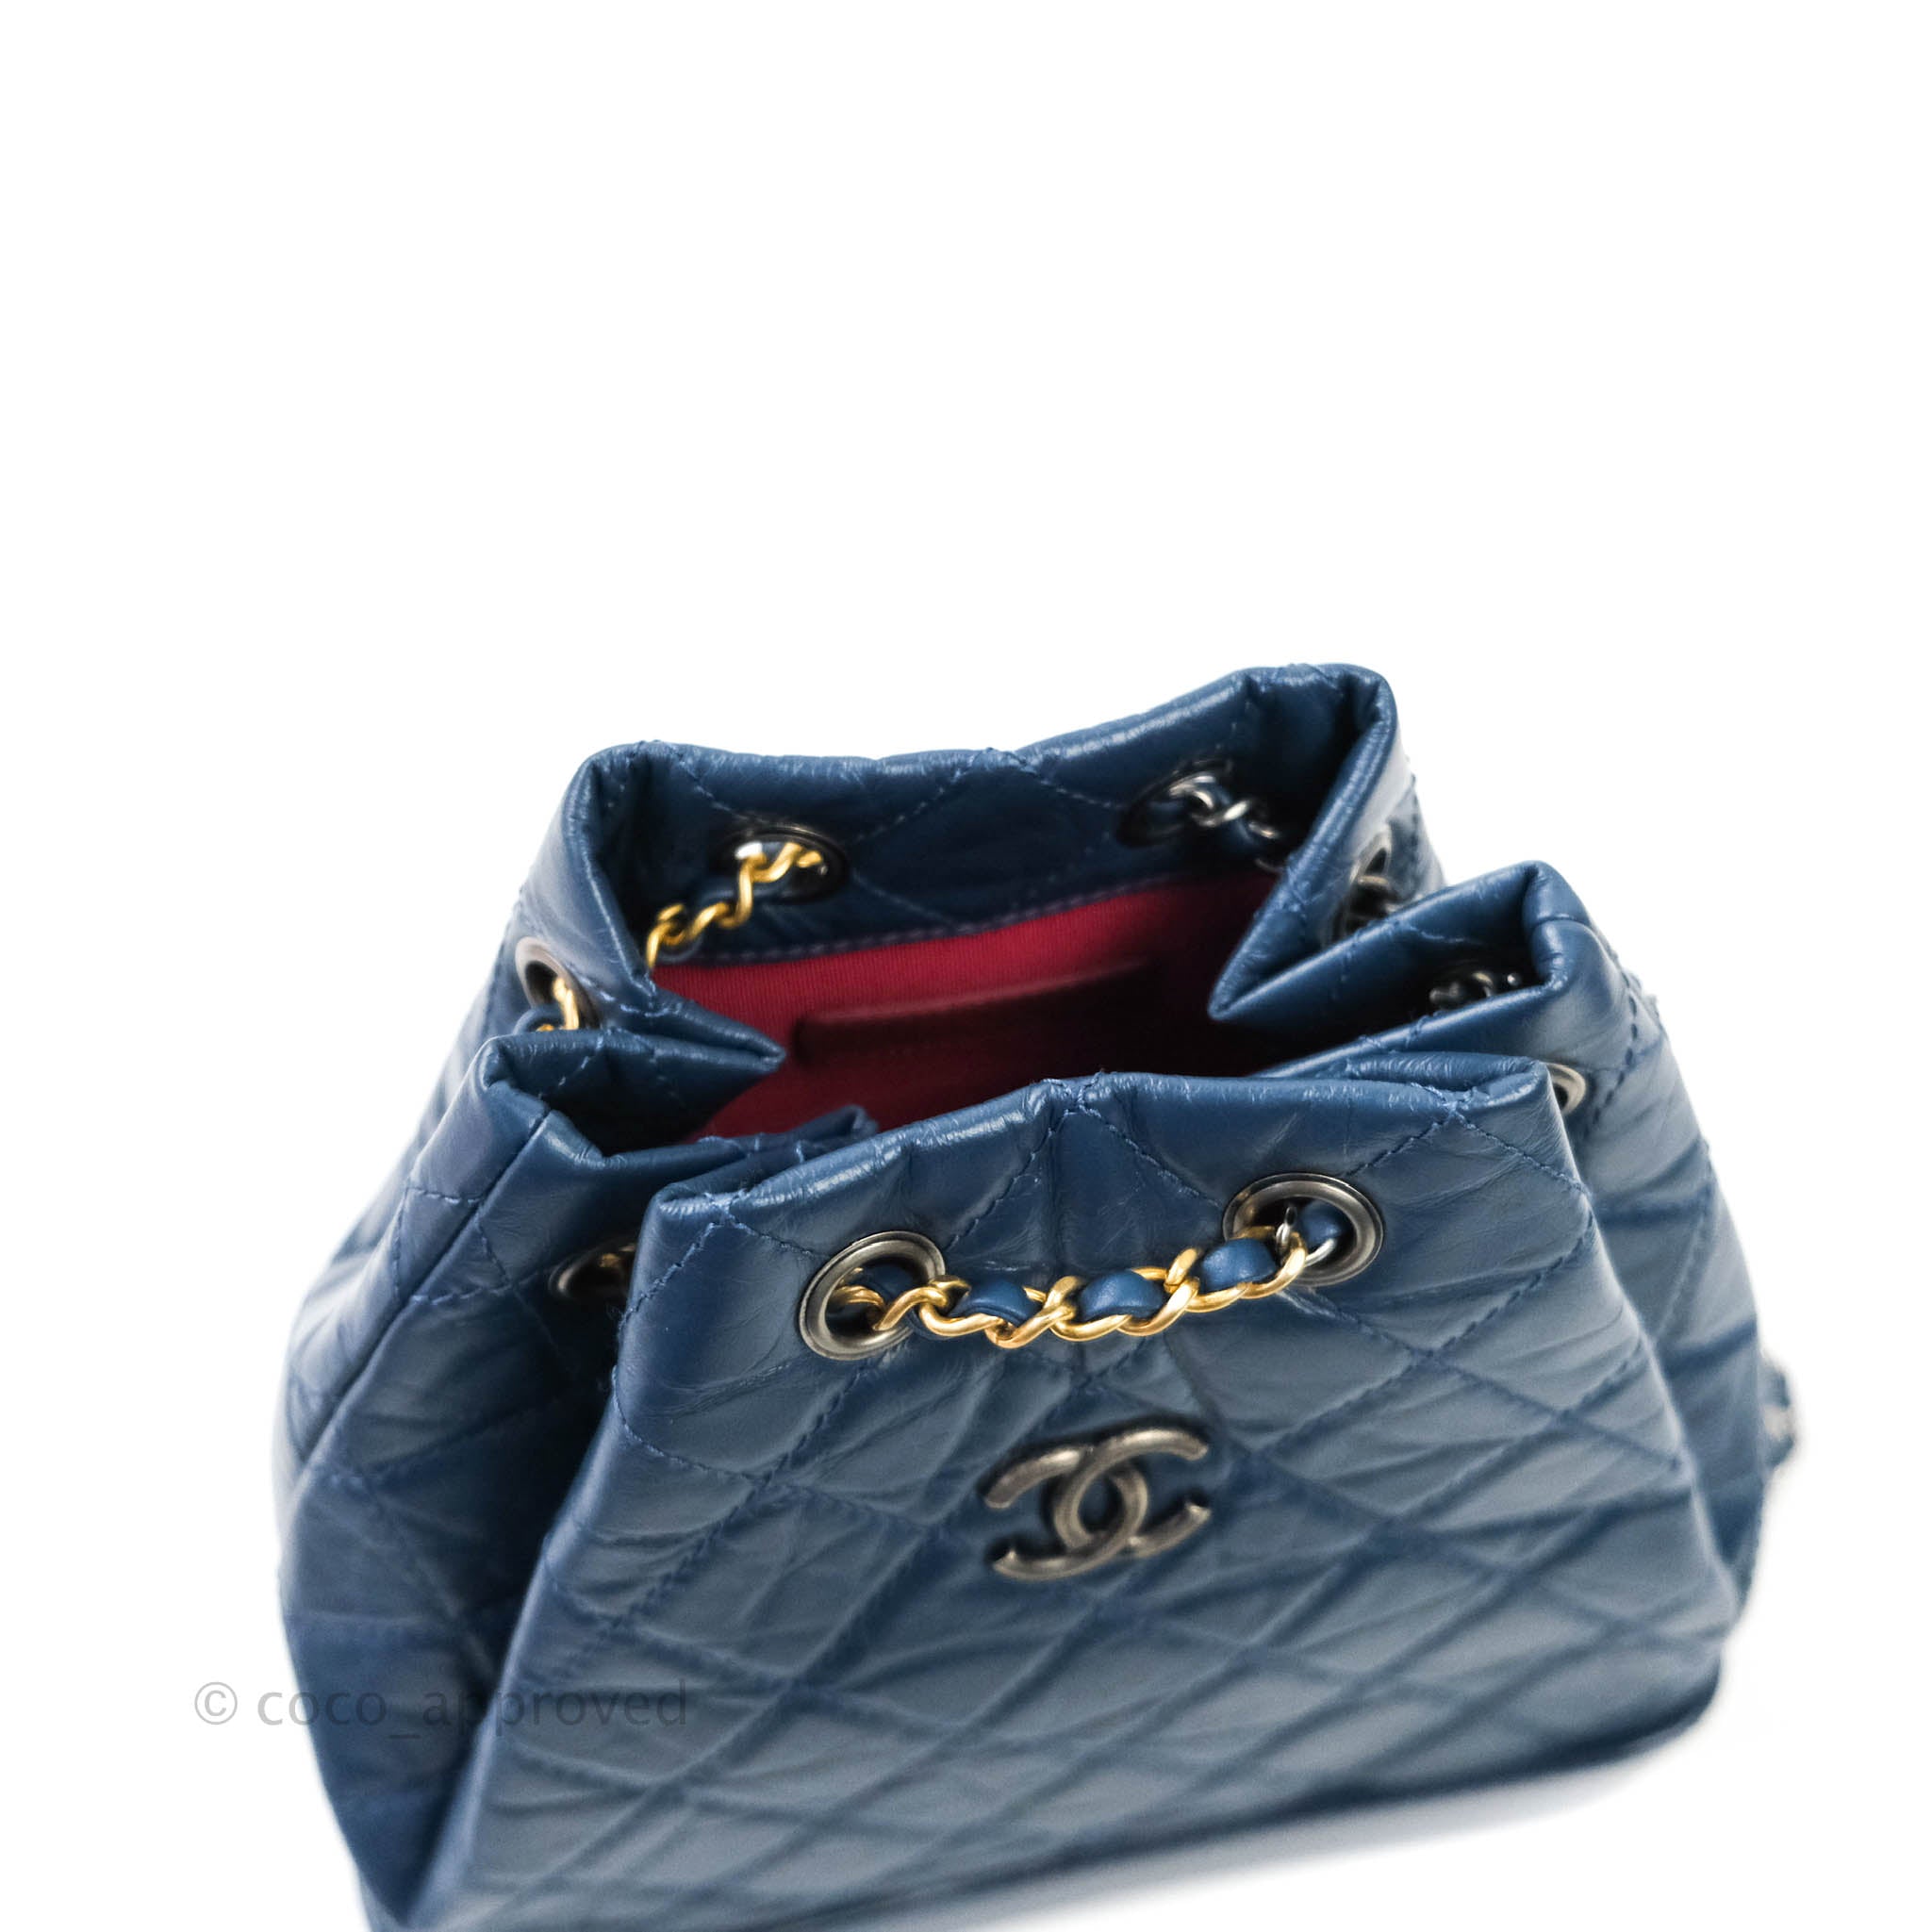 Chanel Gabrielle Backpack Blue Aged Calfskin Small – Coco Approved Studio